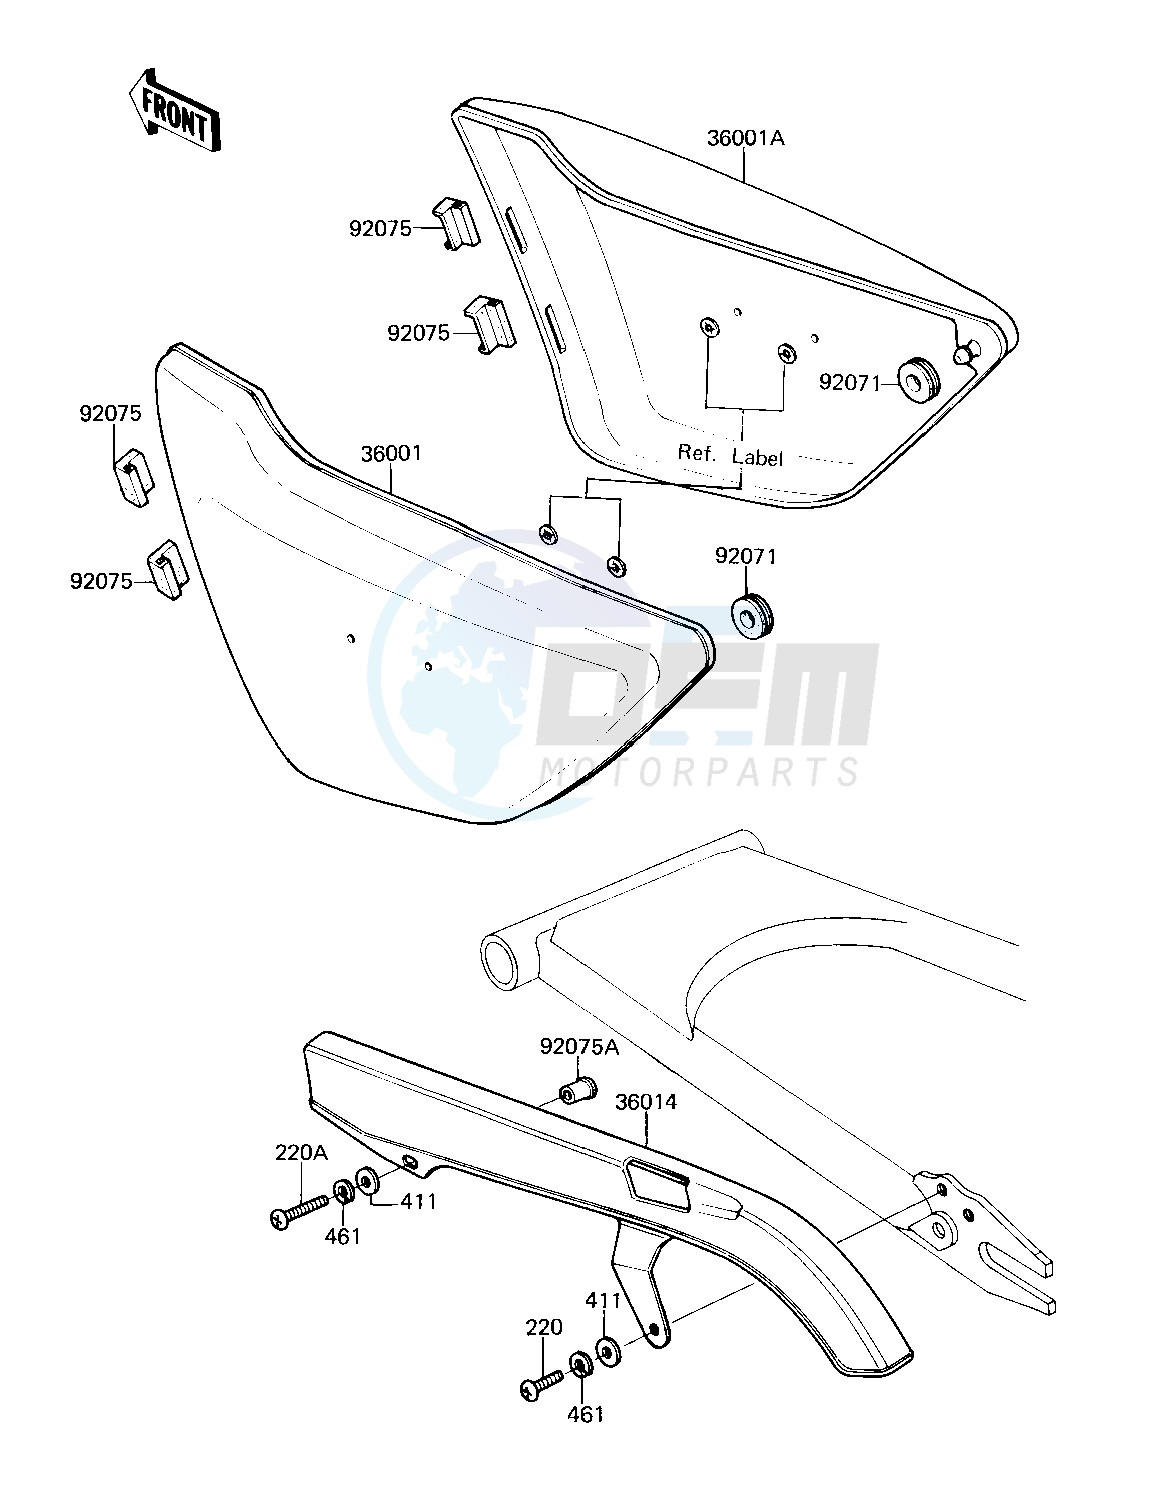 SIDE COVERS_CHAIN COVER -- 81 D2- - blueprint